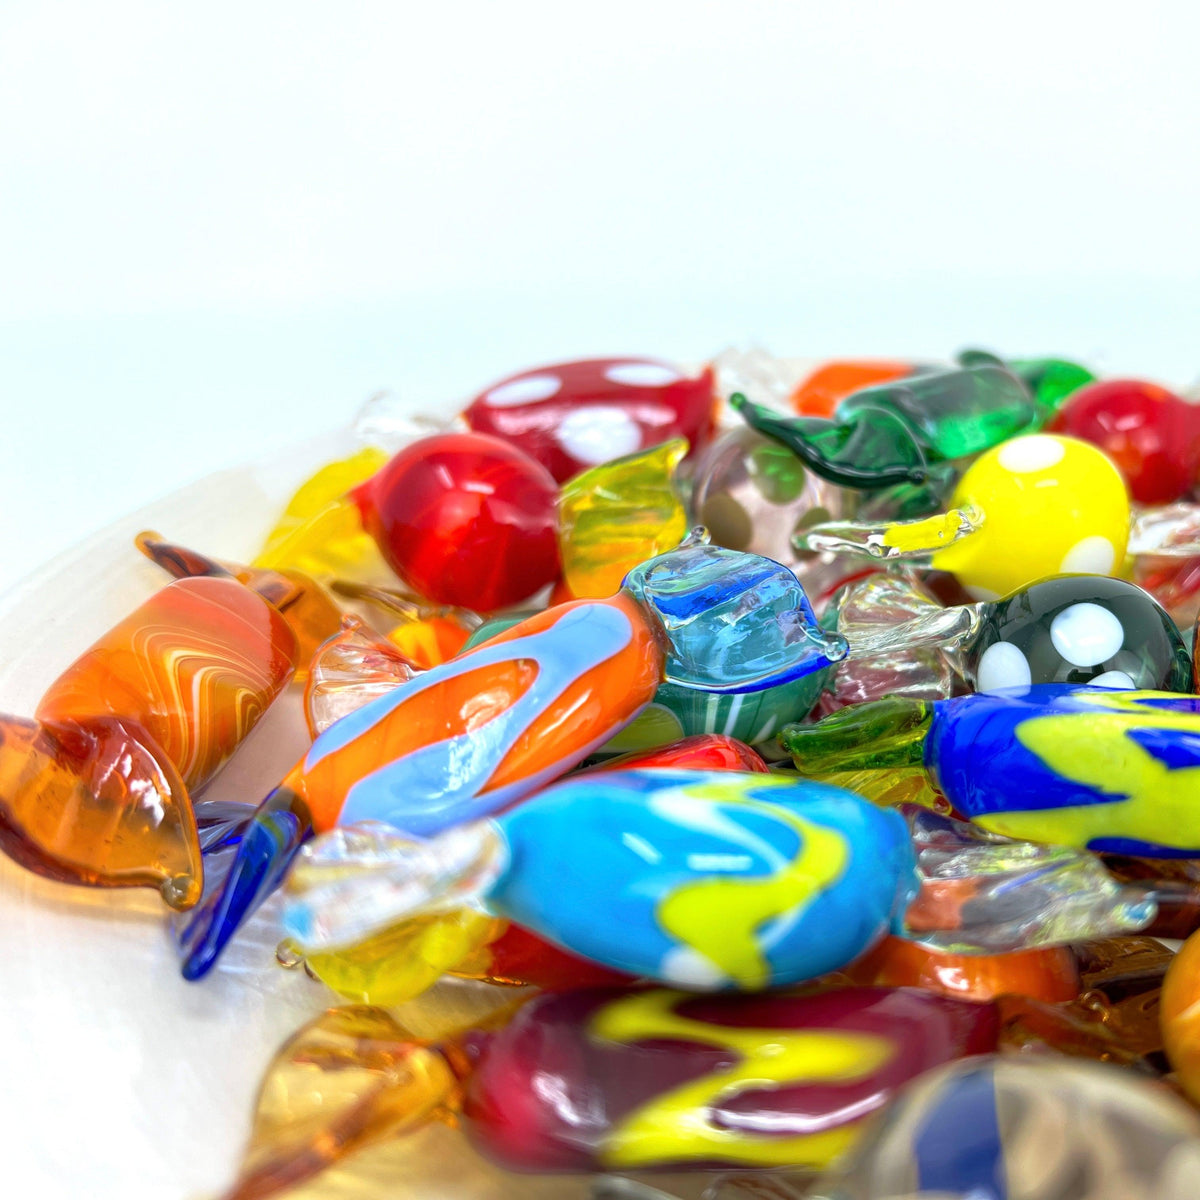 Murano Glass Candy, Retro, Set of 3, 5, or 10 Candies, Decorative Glass Sweets at MyItalianDecor